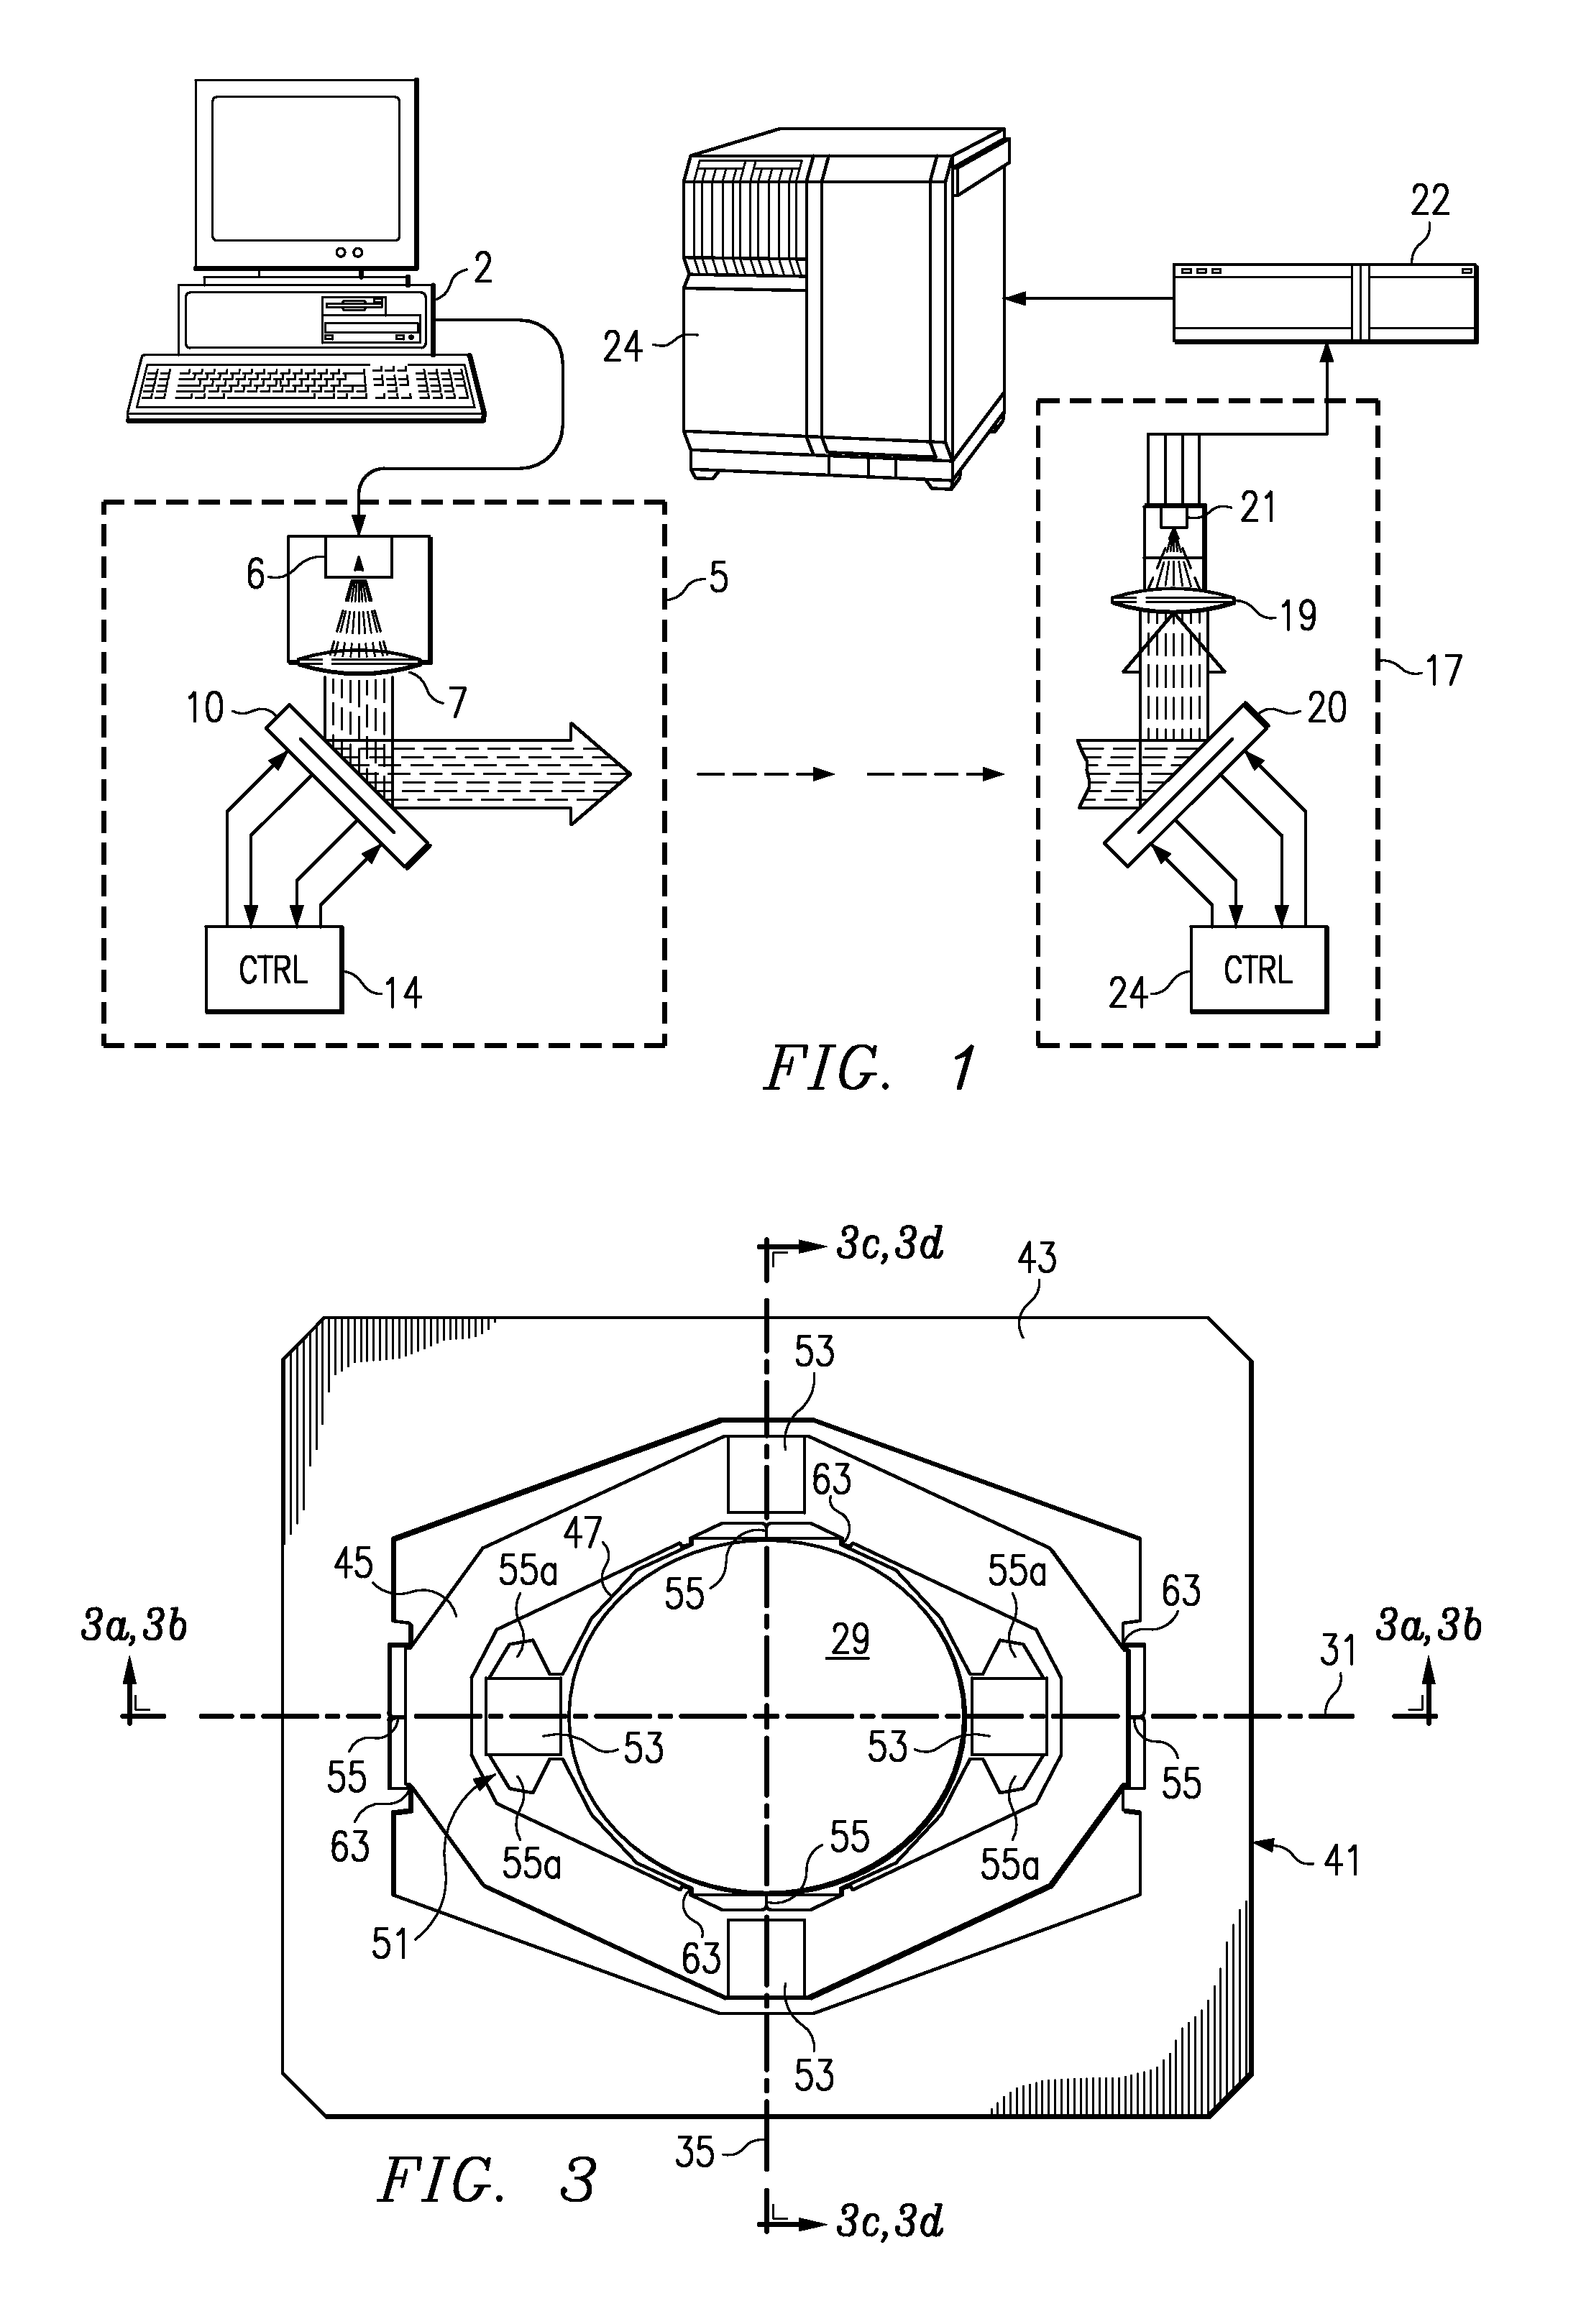 Cooperating array of micromirror devices for wireless optical communication